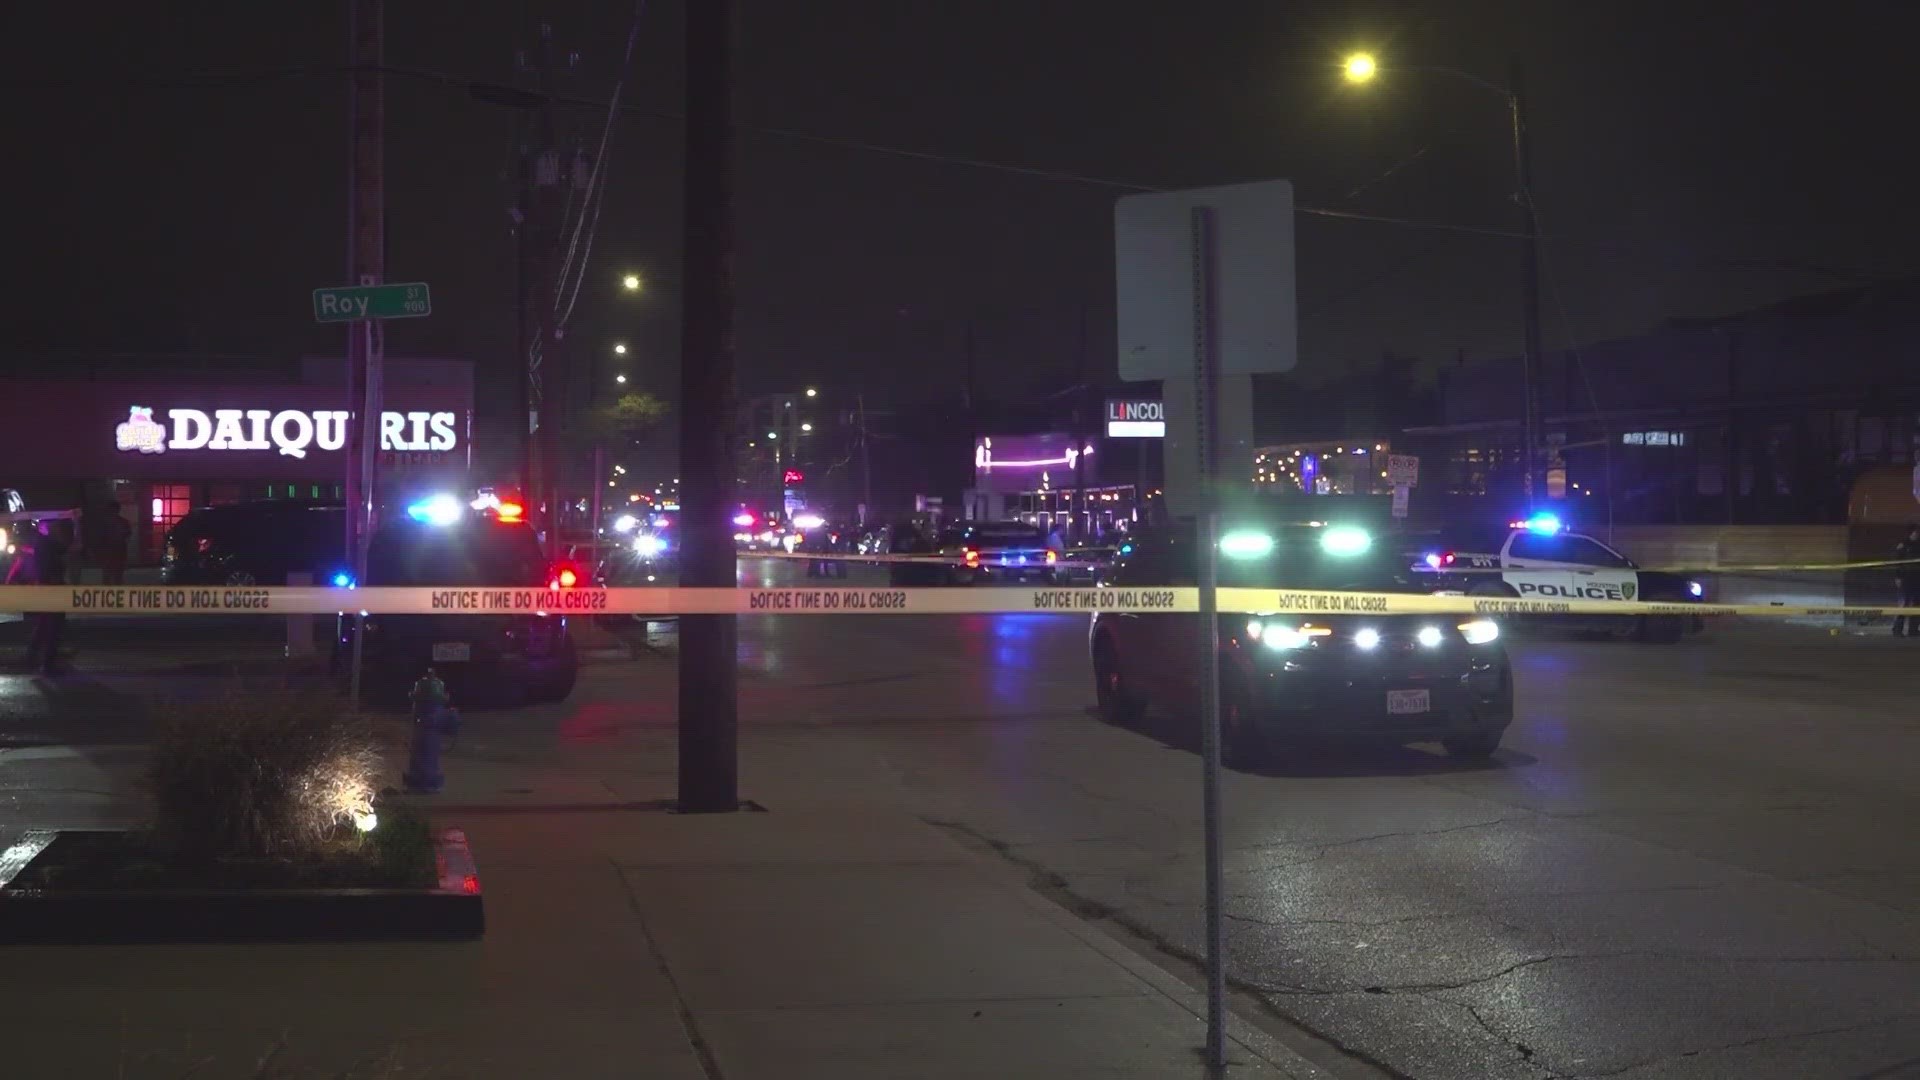 Houston police say a man shot four people Friday night after security kicked him out of the club for getting into a fight.